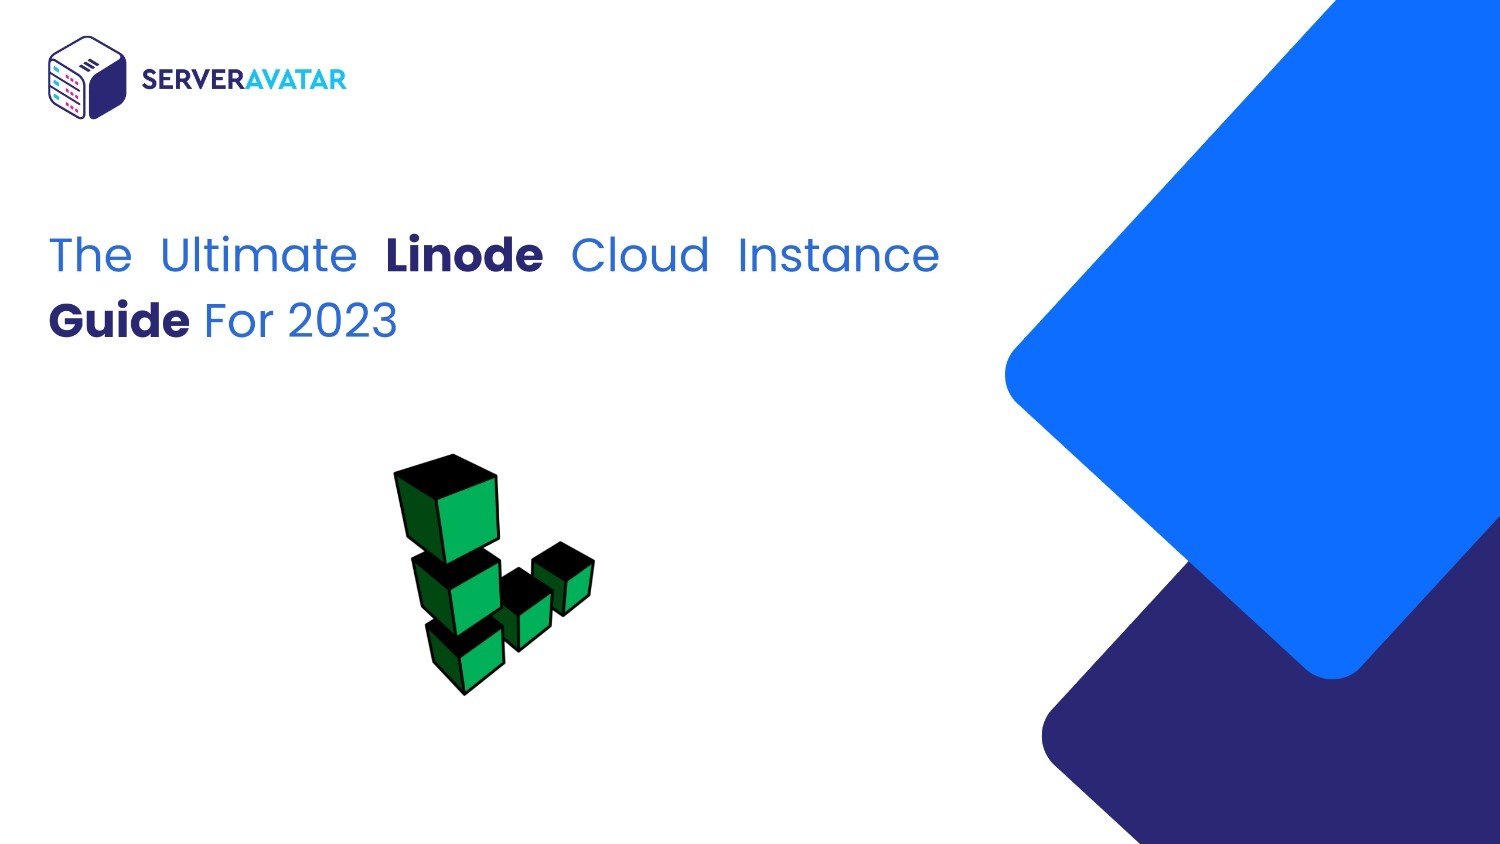 The Ultimate Linode Cloud Instance Guide for 2023